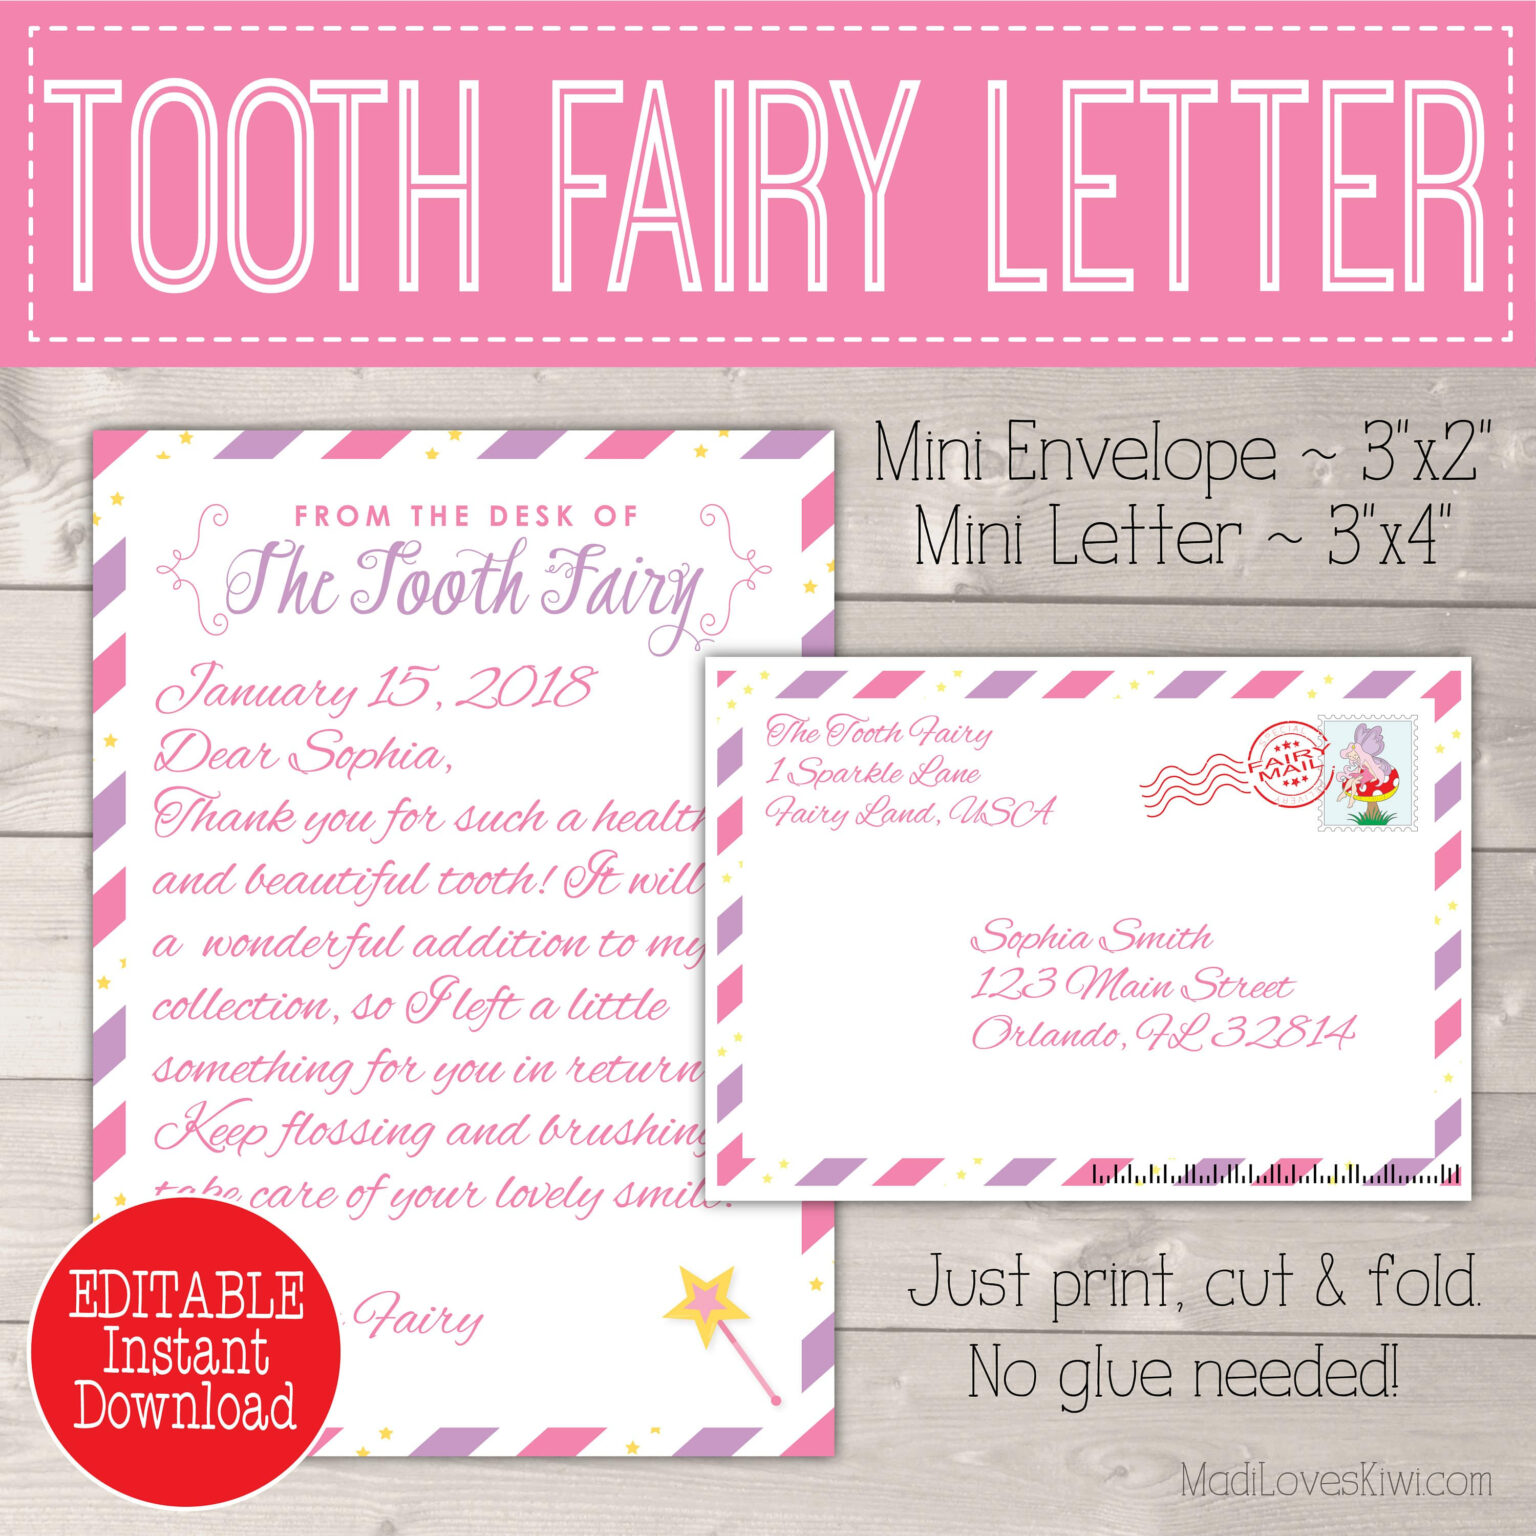 free tooth fairy letter template word